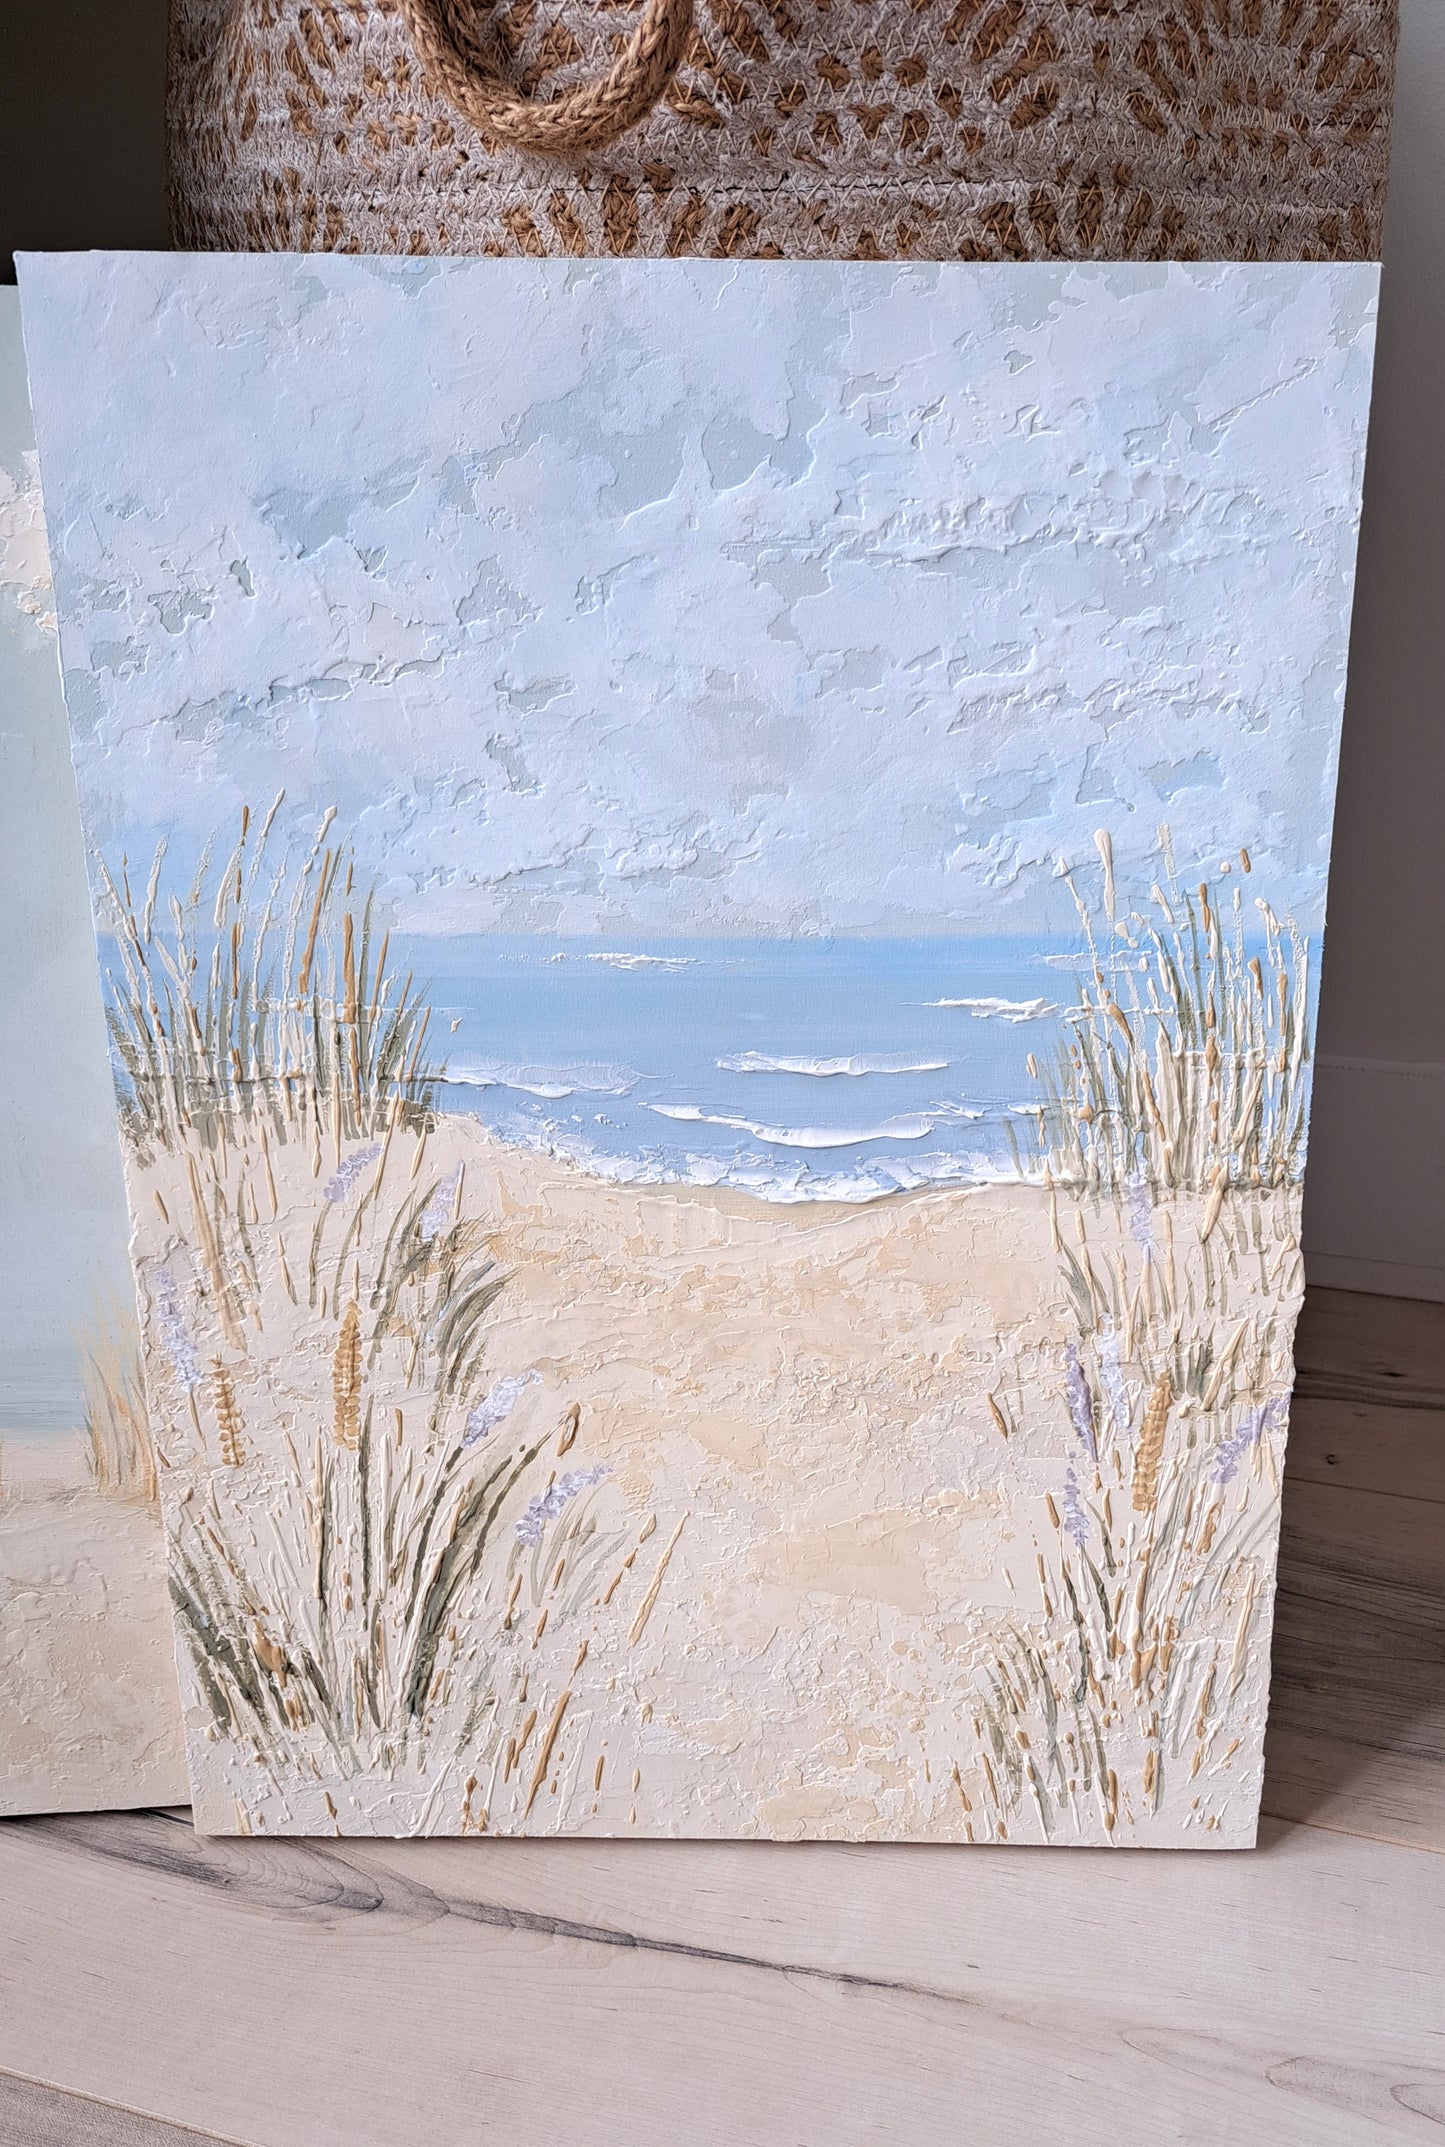 Textured hand-painted scenic beach painting on solid wood panel.